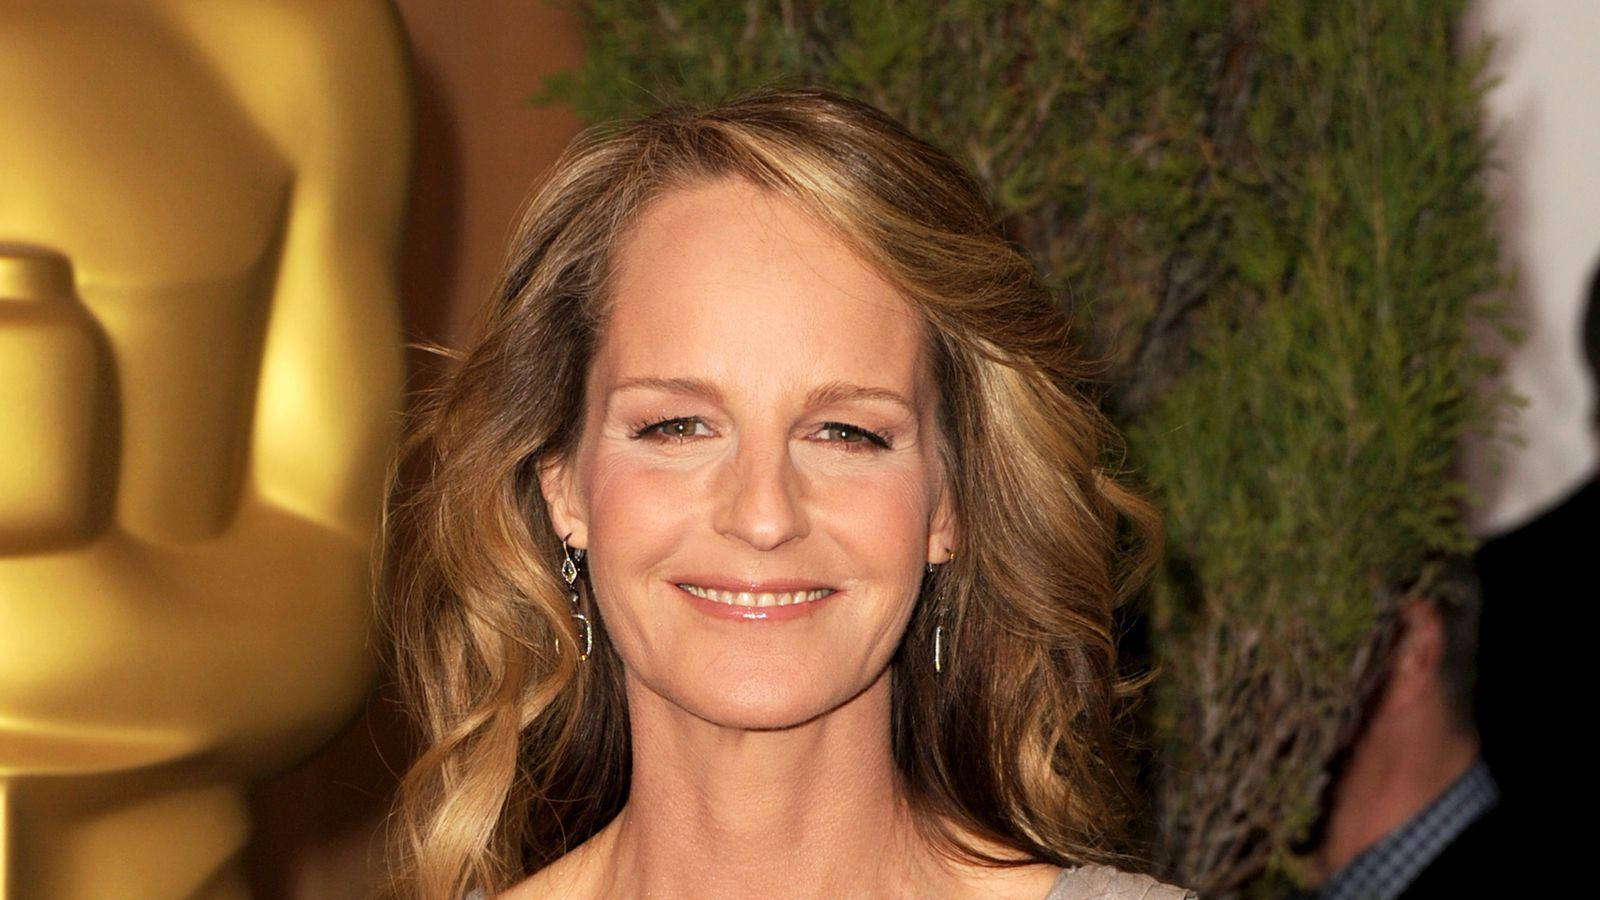 Helenhunt Awards Ceremony Doesn't Make Sense In The Context Of Computer Or Mobile Wallpaper. Could You Please Provide A Sentence That Fits The Context? Wallpaper